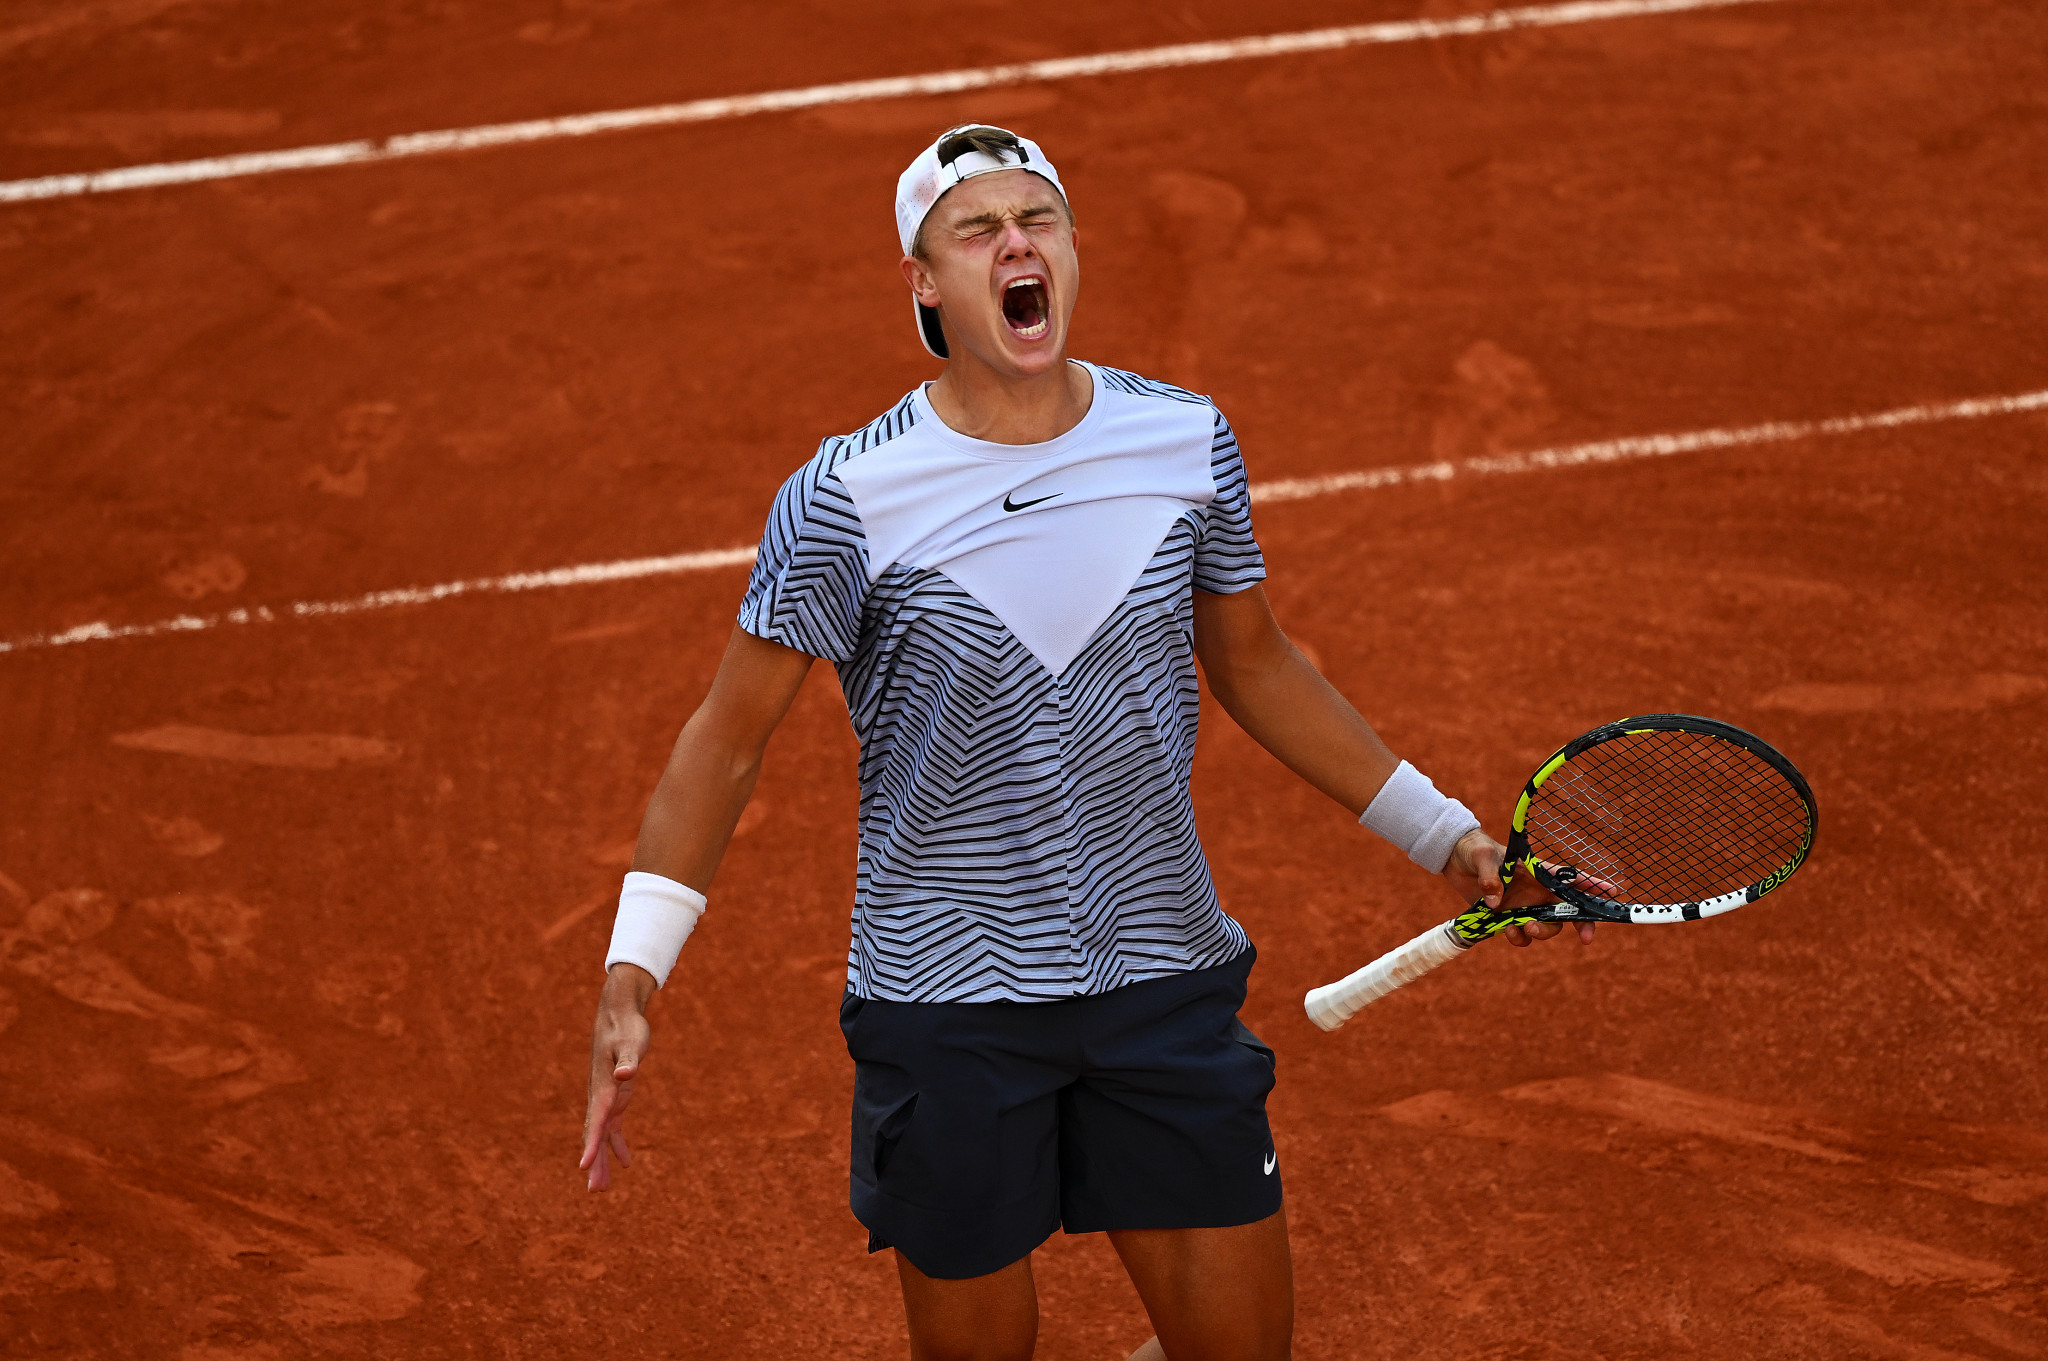 Rune wins four-hour thriller to seal place in French Open quarter-finals